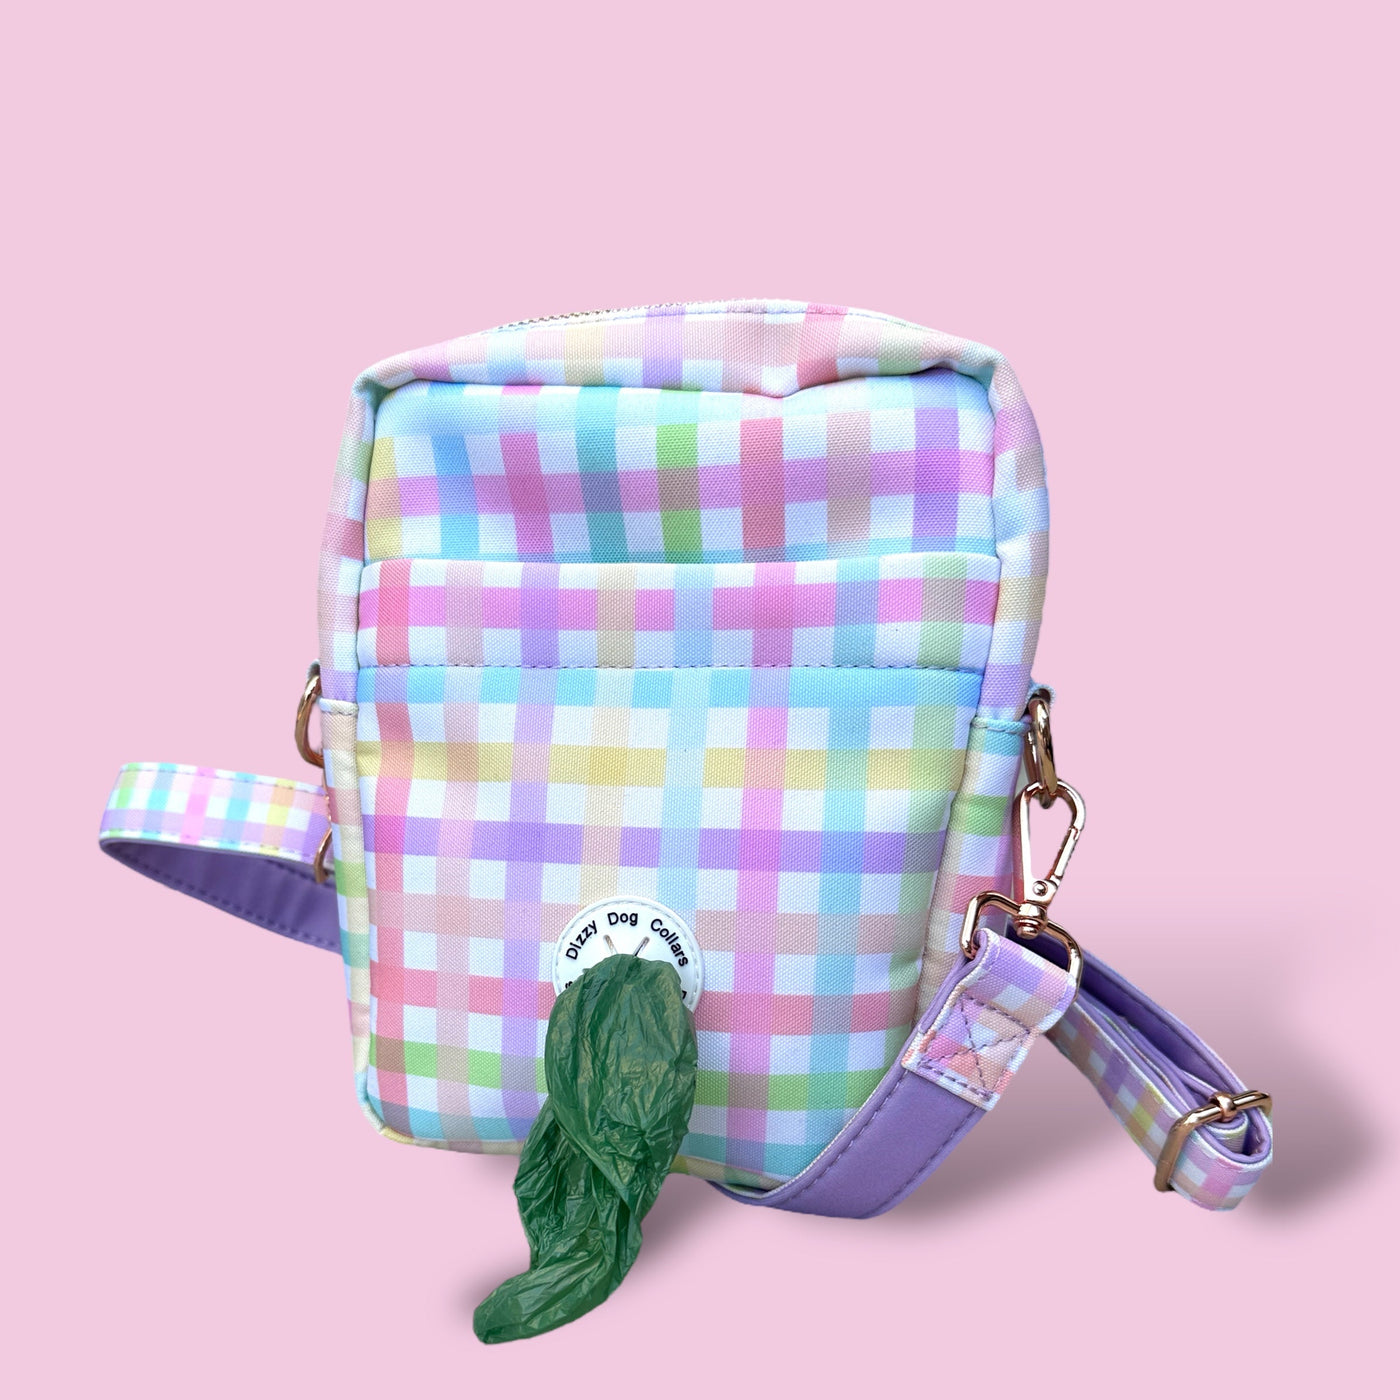 Crossbody Dog Walking Bag | Sherbet Gingham | With Poop Bag Access-Adventure Pouch-Dizzy Dog Collars